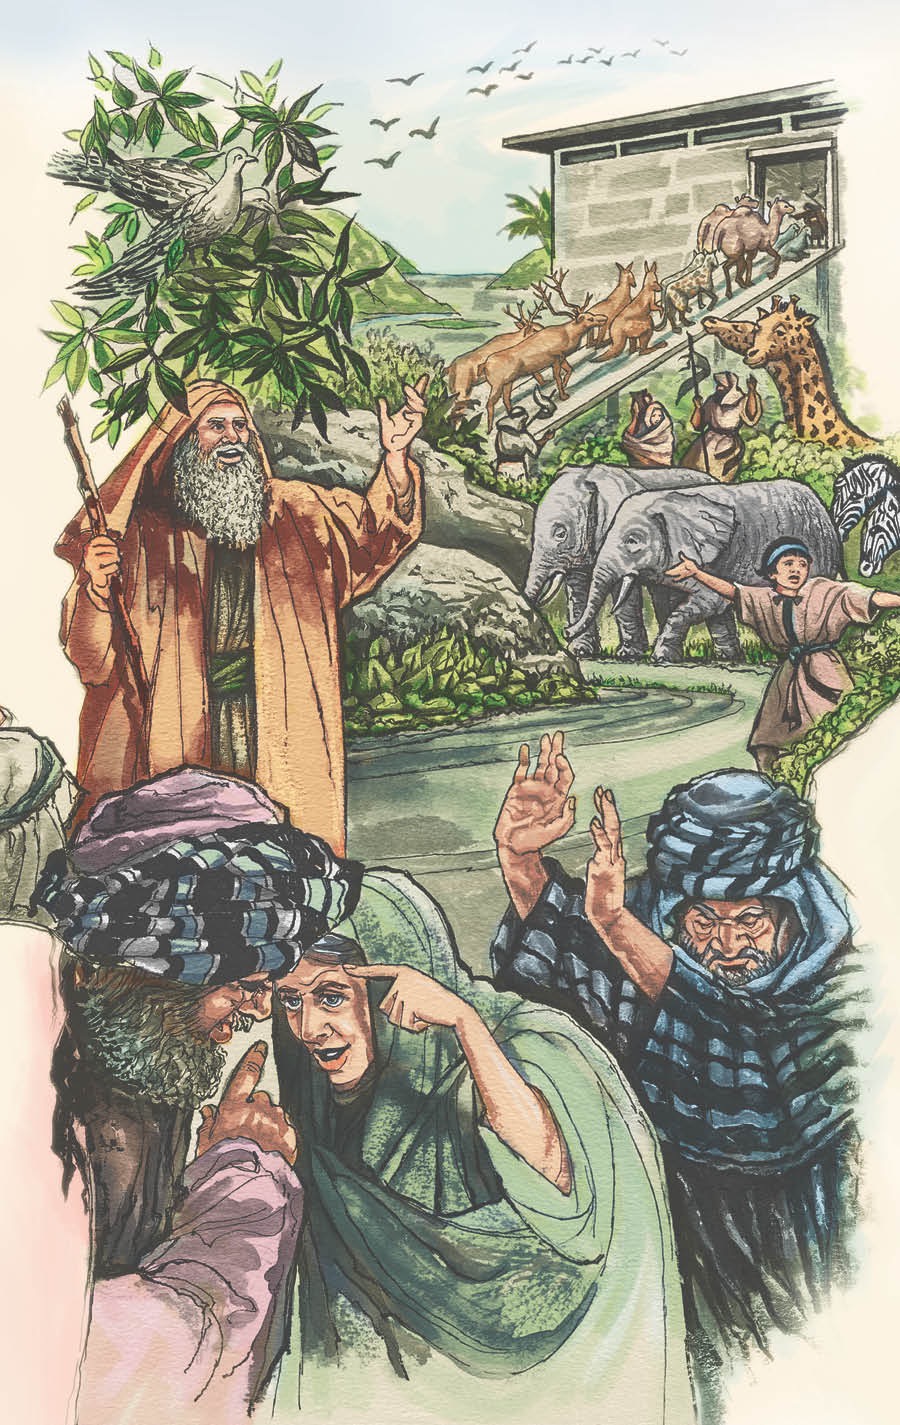 Even as Noah and his family bring the animals into the ark, the wicked people refuse to listen to the warning message